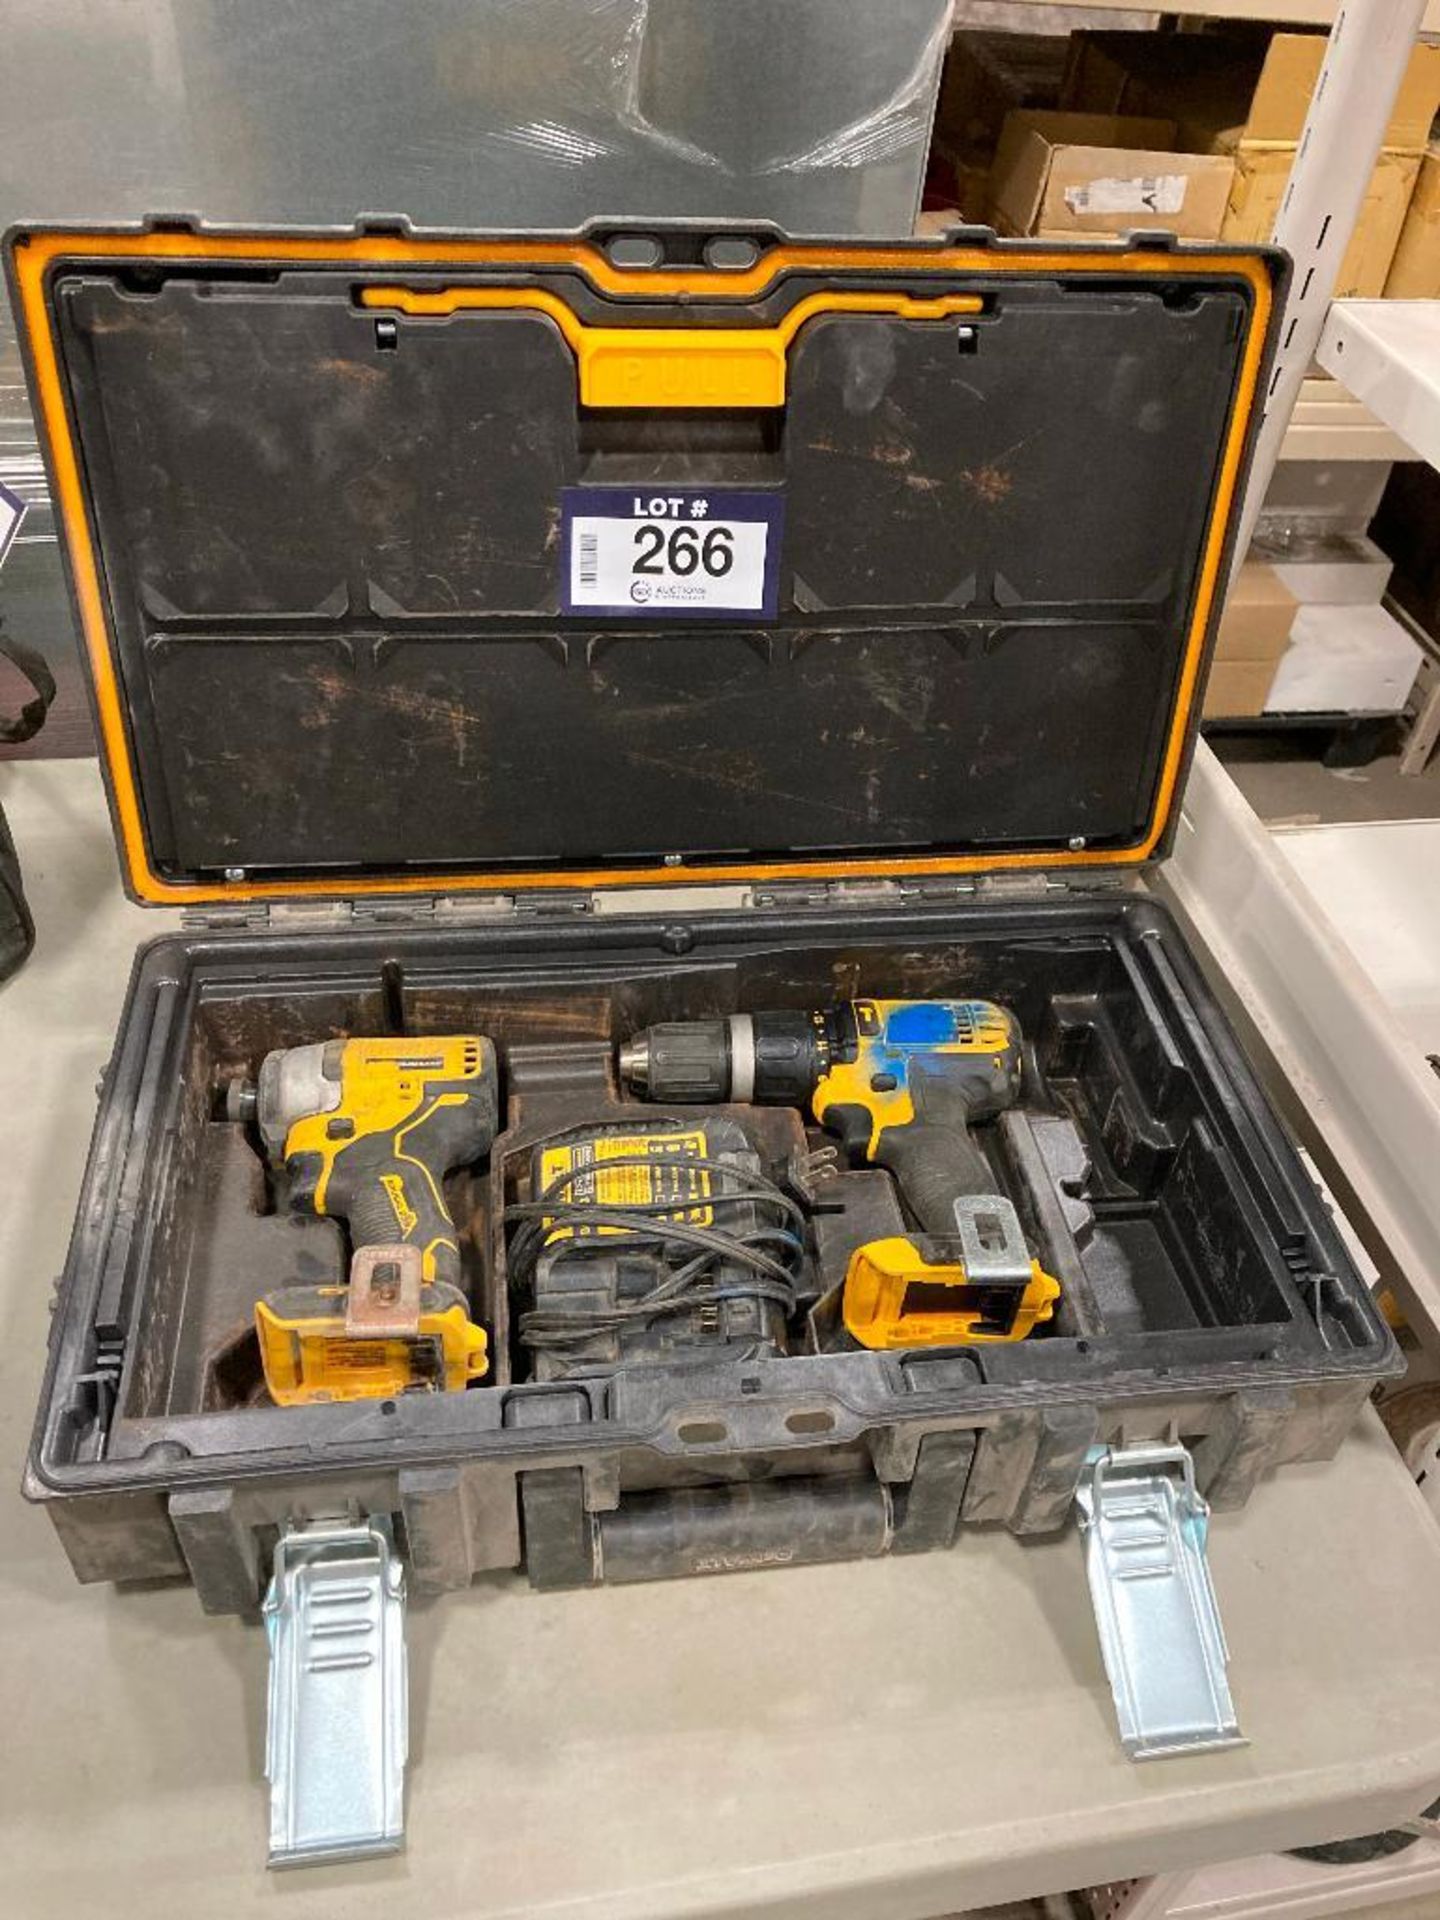 DeWalt Toolbox Including: (1) 1/2" Hammer Drill, (1) 1/4" Impact Drill and (1) Battery Charger